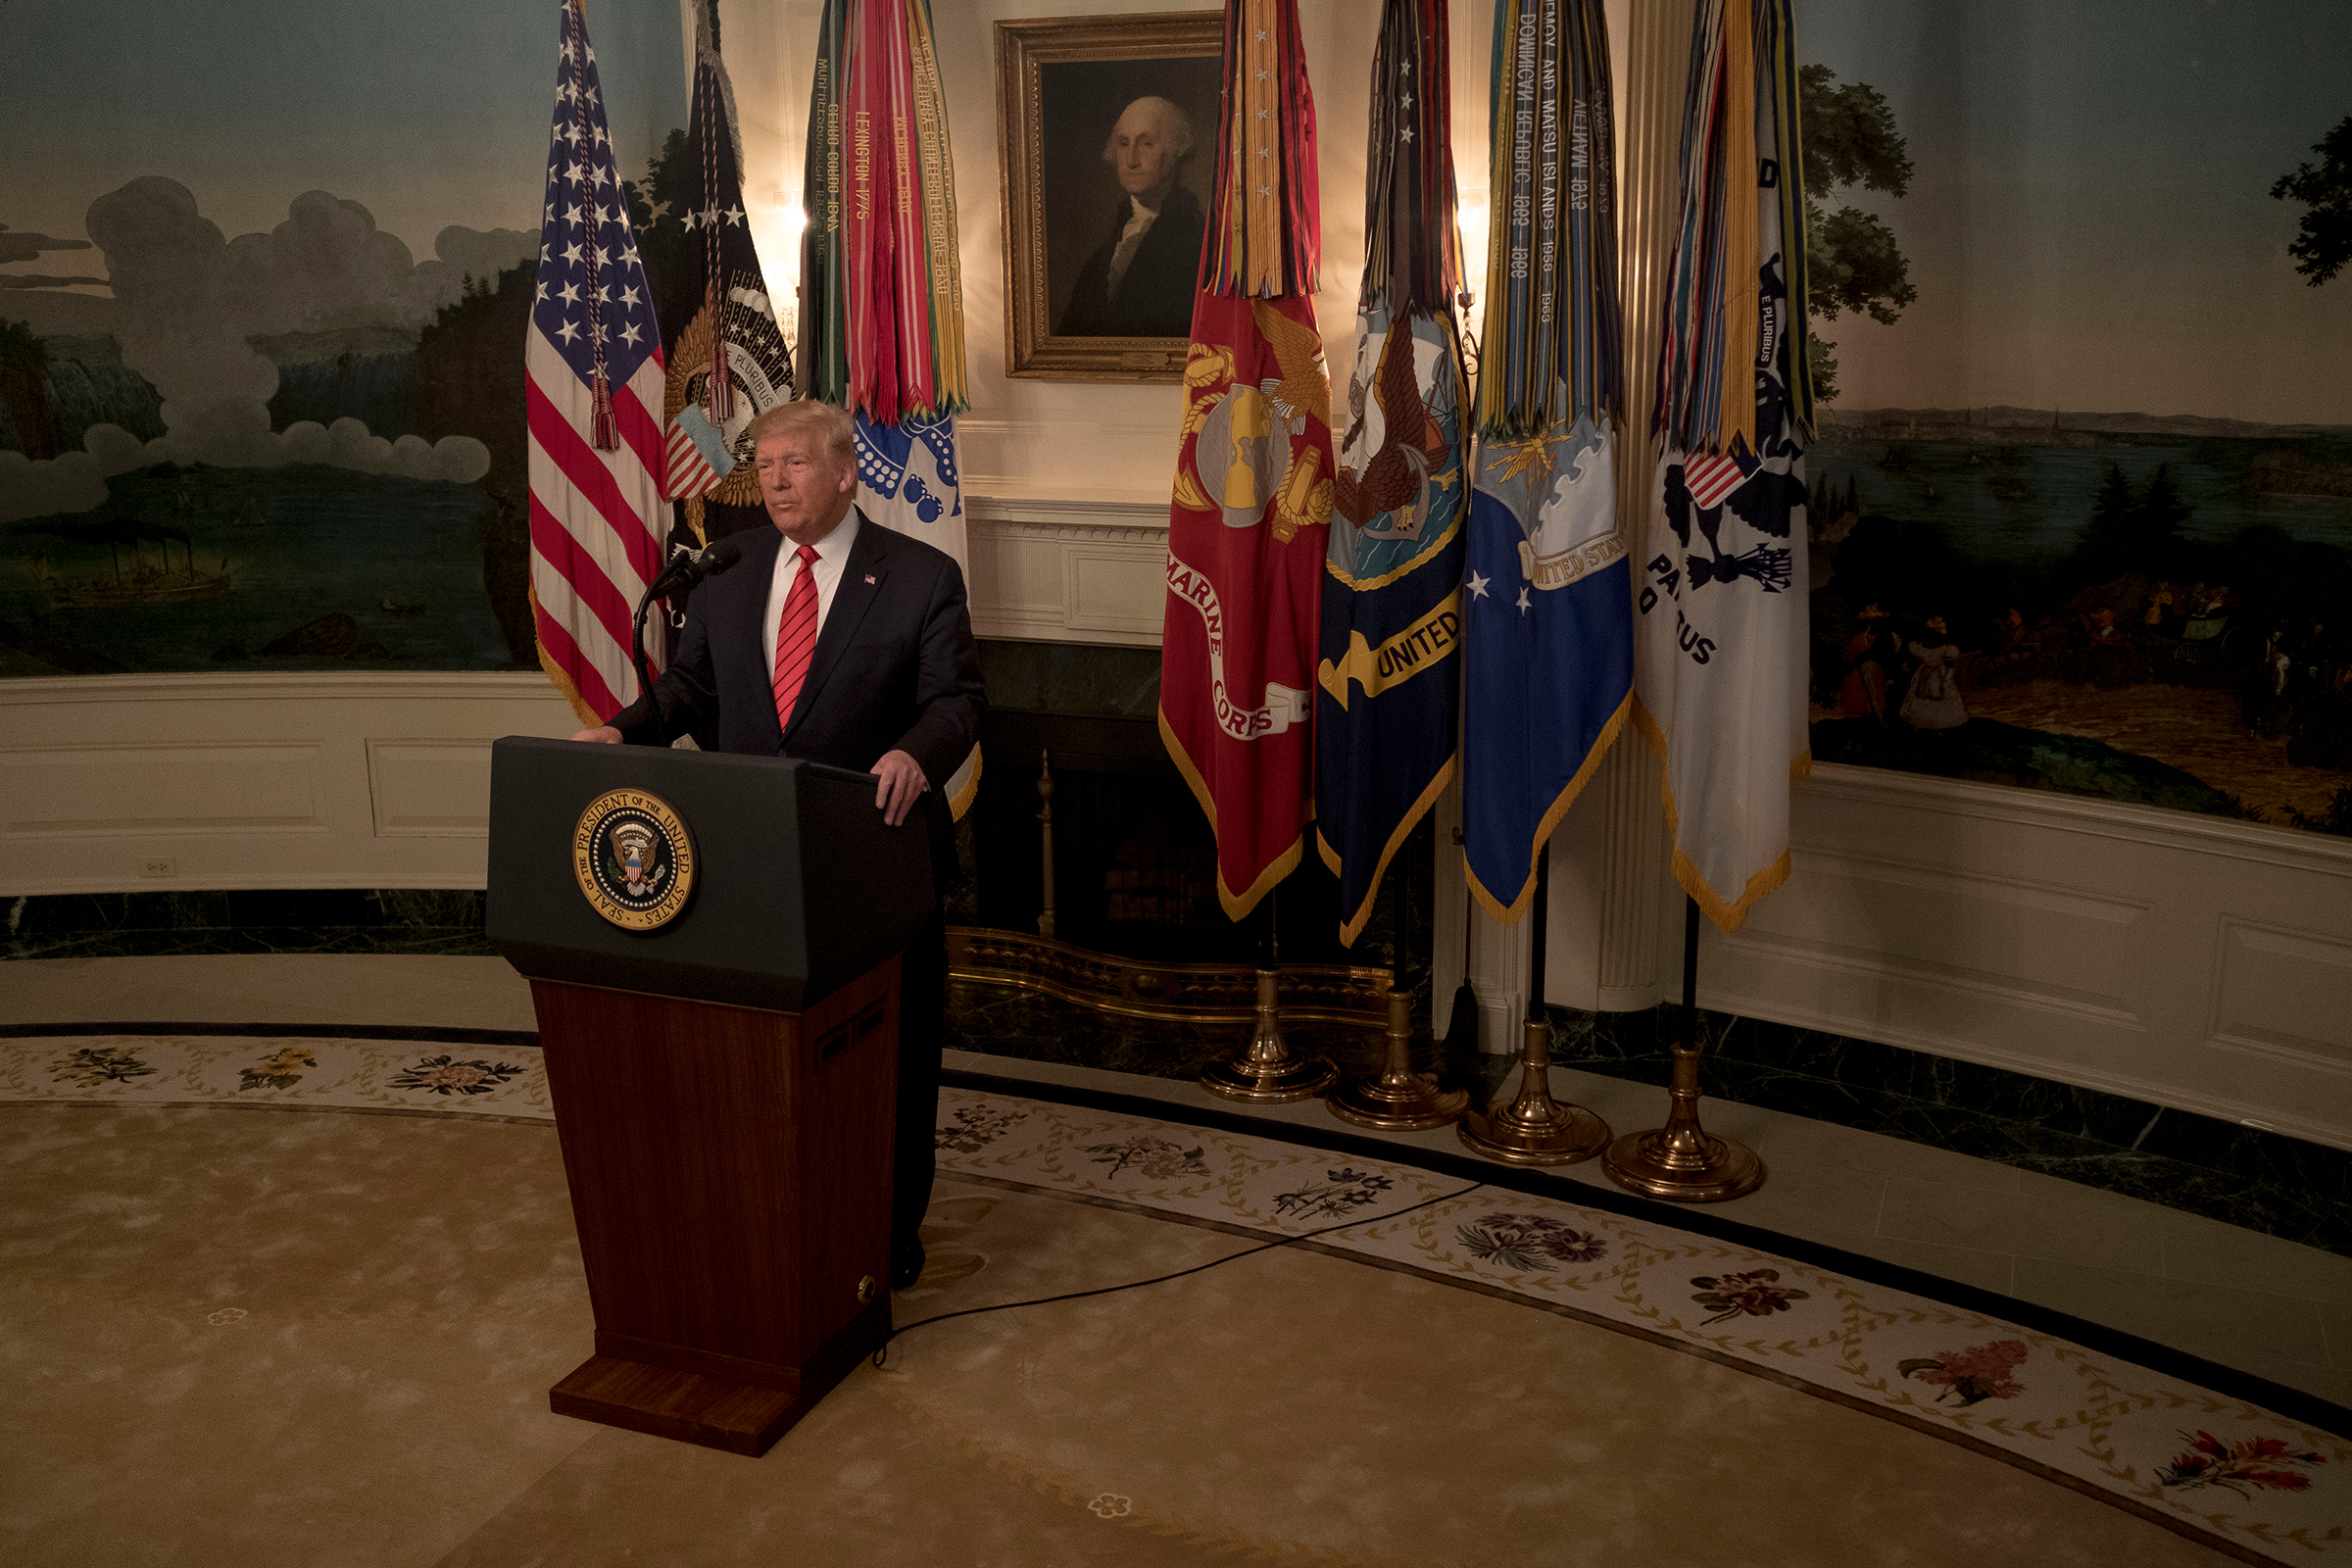 President Donald Trump announces the death of ISIS leader Abu Bakr al-Baghdadi, in a raid by American special operations forces in Syria, in remarks at the White House in Washington, D.C., on Oct. 27, 2019.